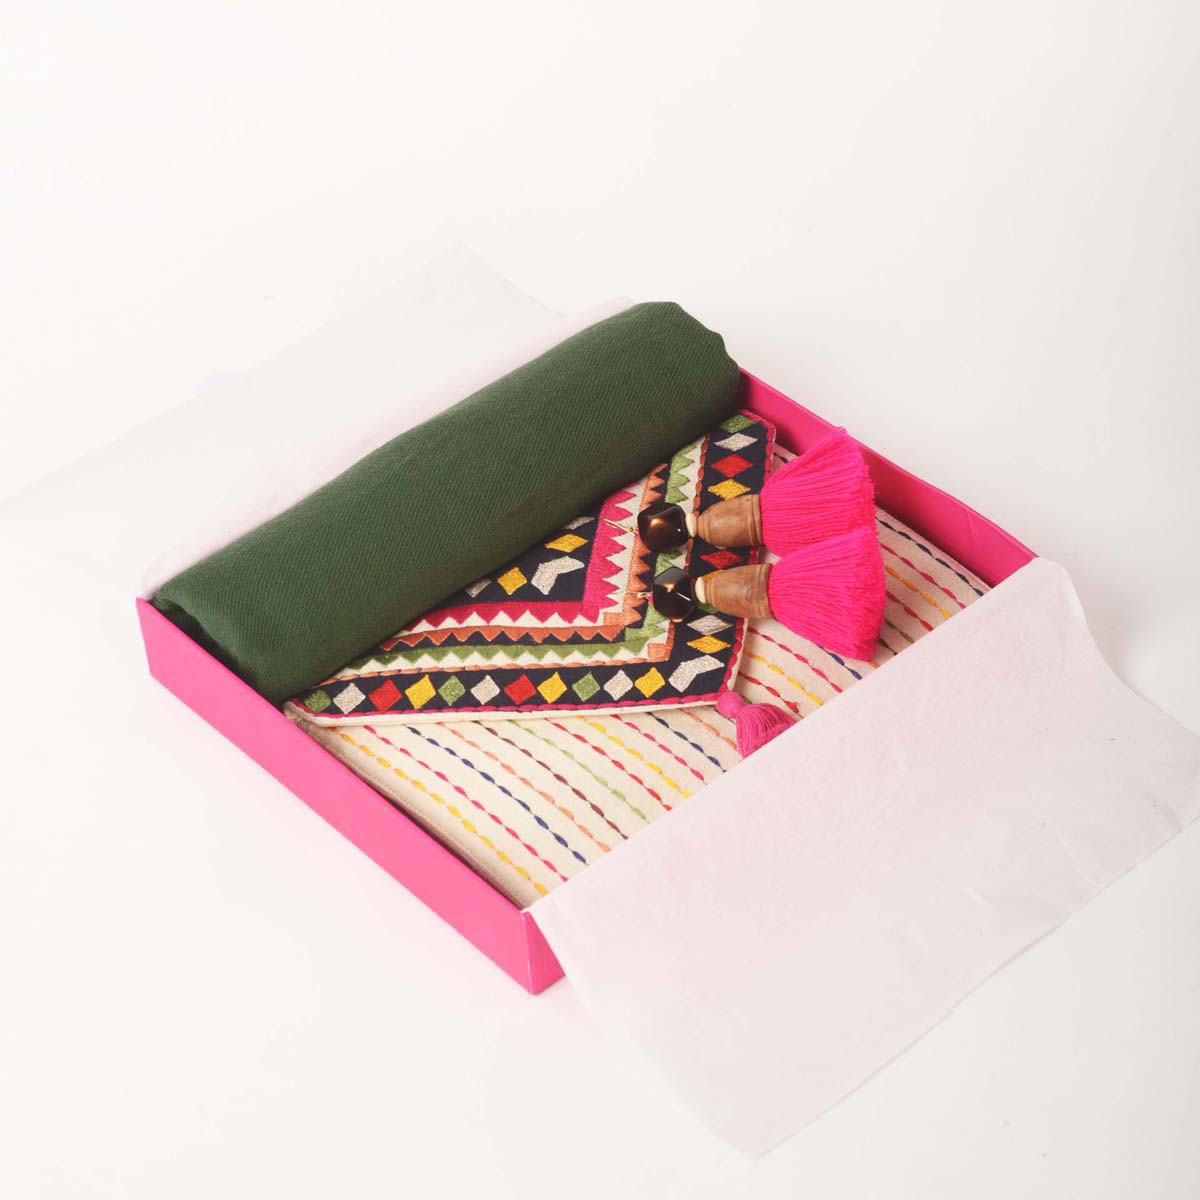 3 PC GIFT PACK - embroidered envelope clutch with earring and a coordinated green stole